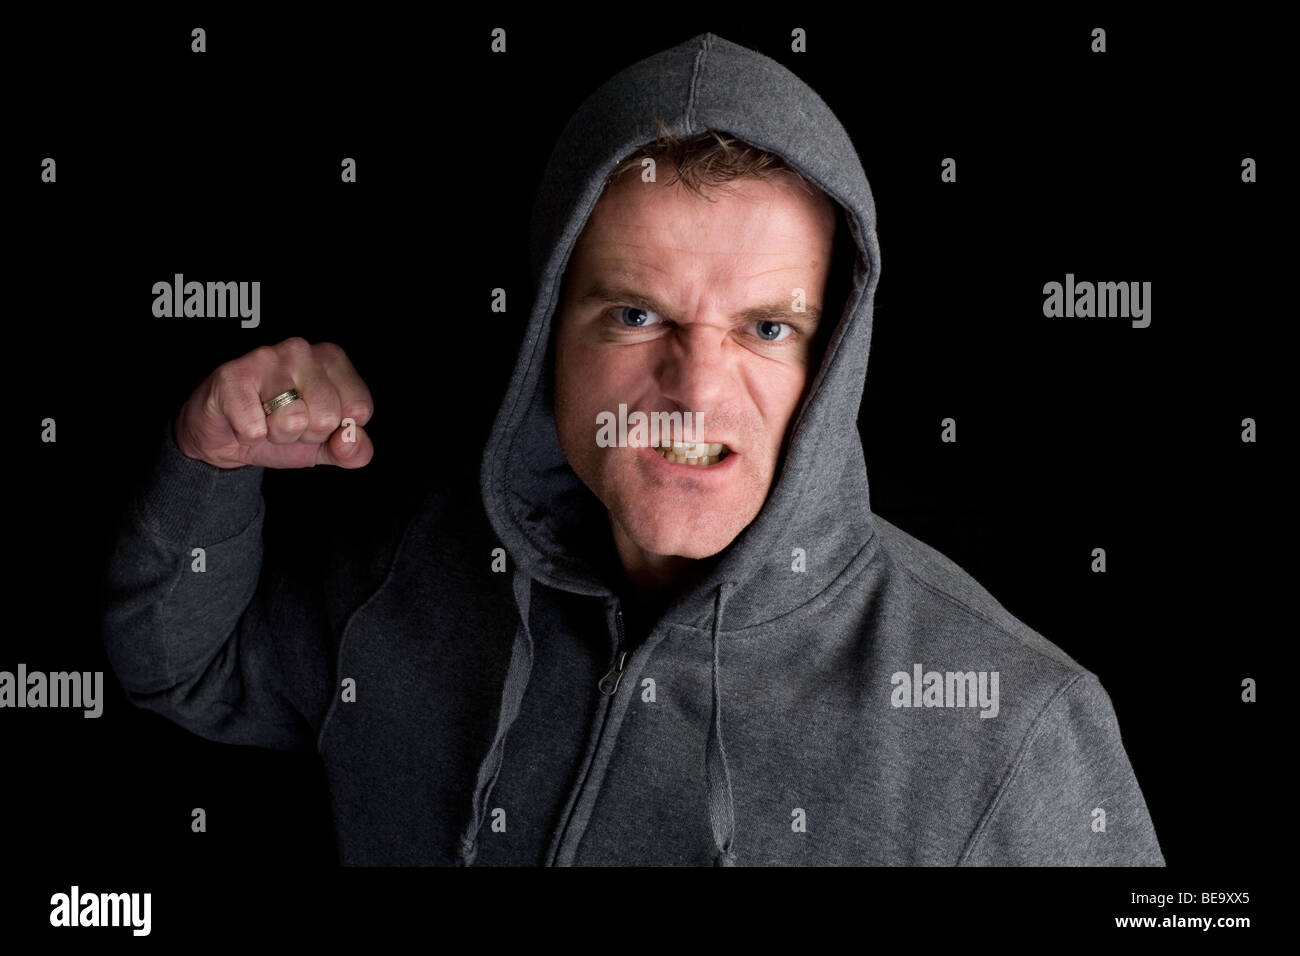 A hooded man clinching his fist Stock Photo